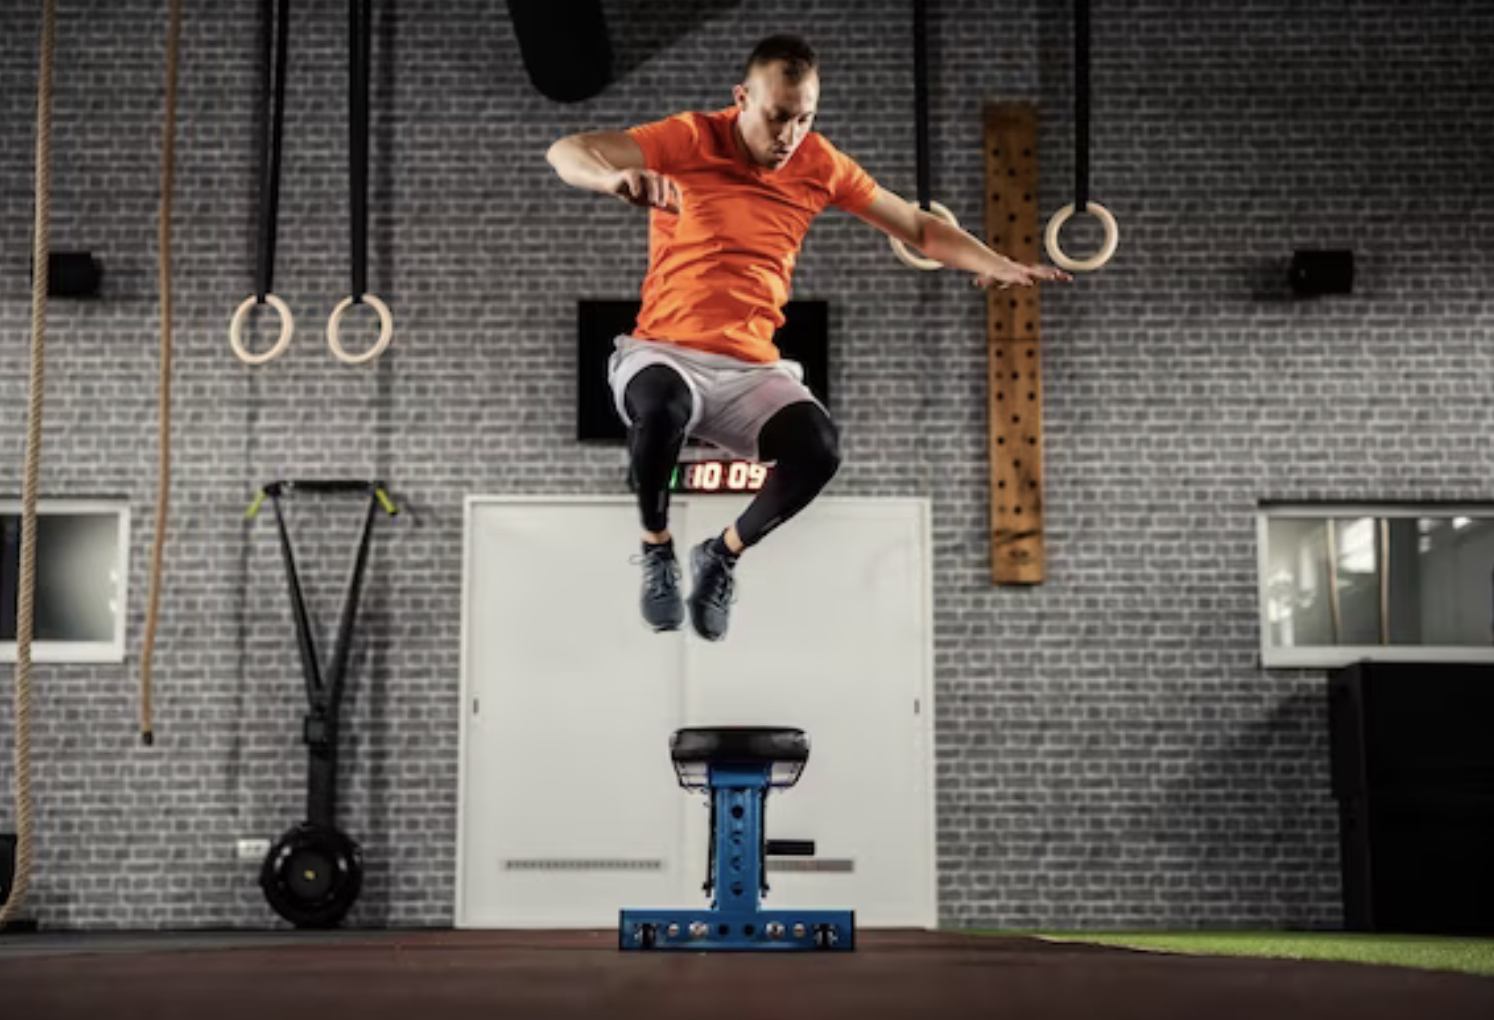 Does Cycling Improve Your Vertical Jump?